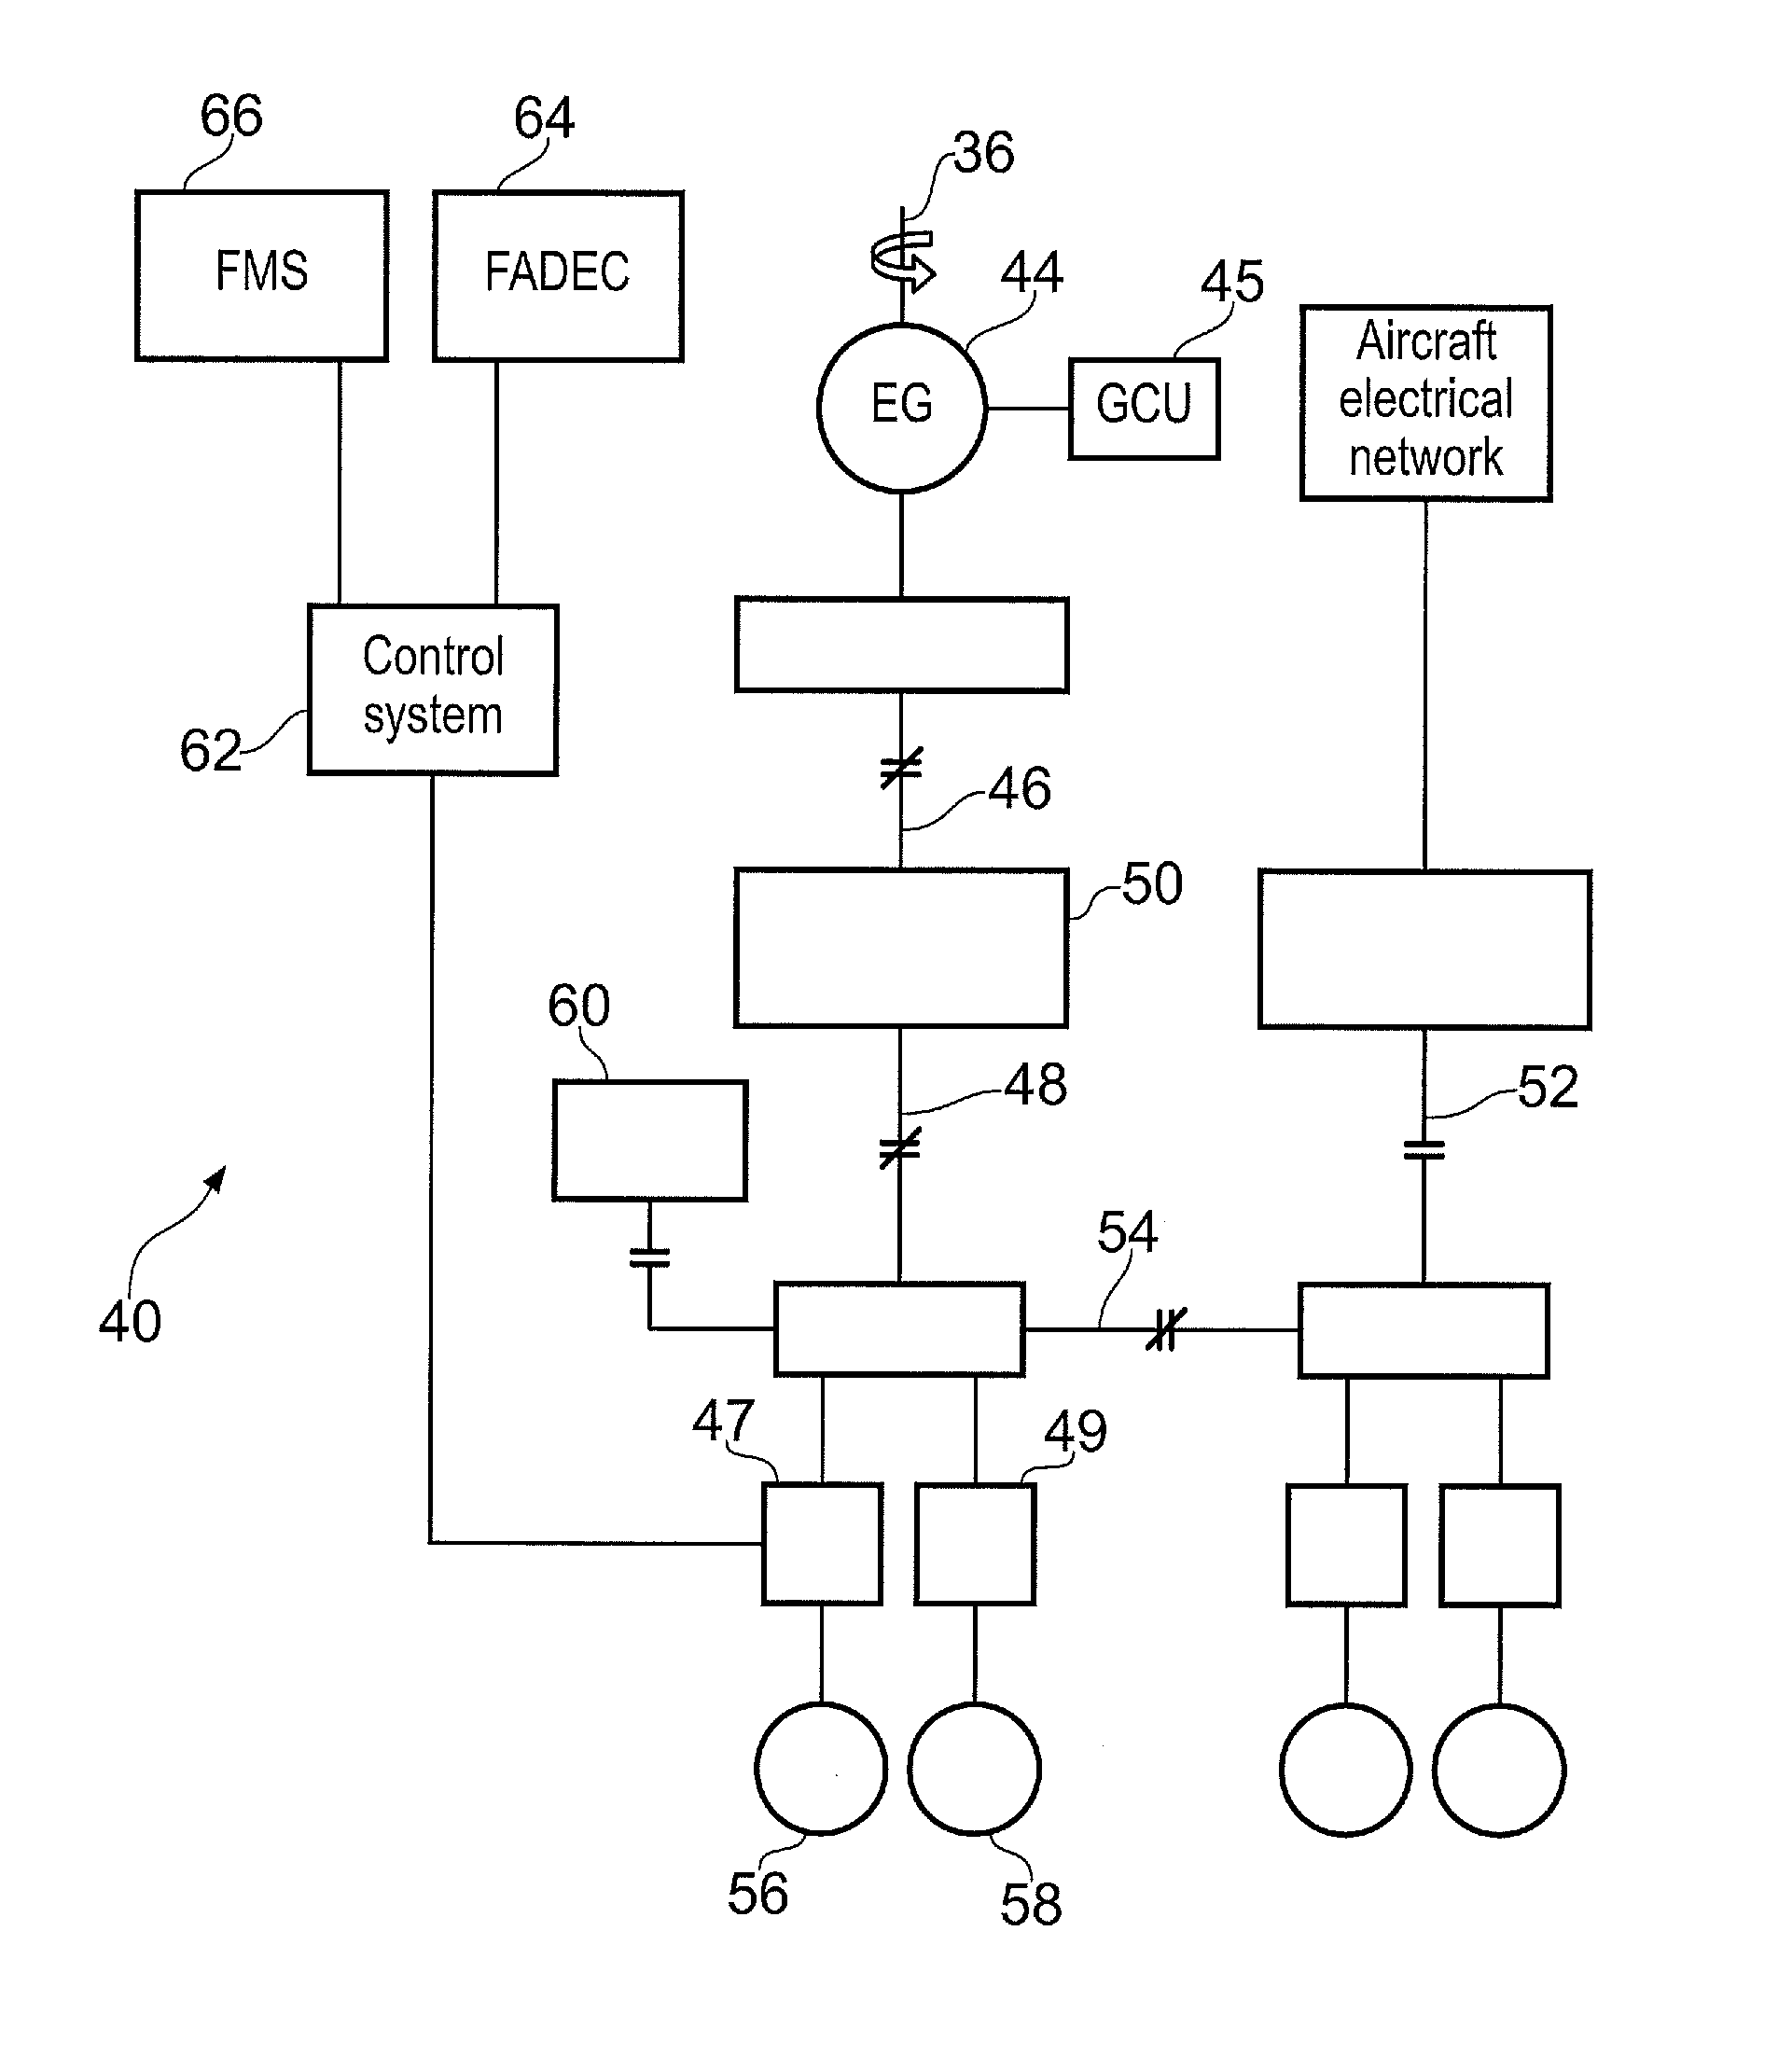 Aircraft electrical system operating method